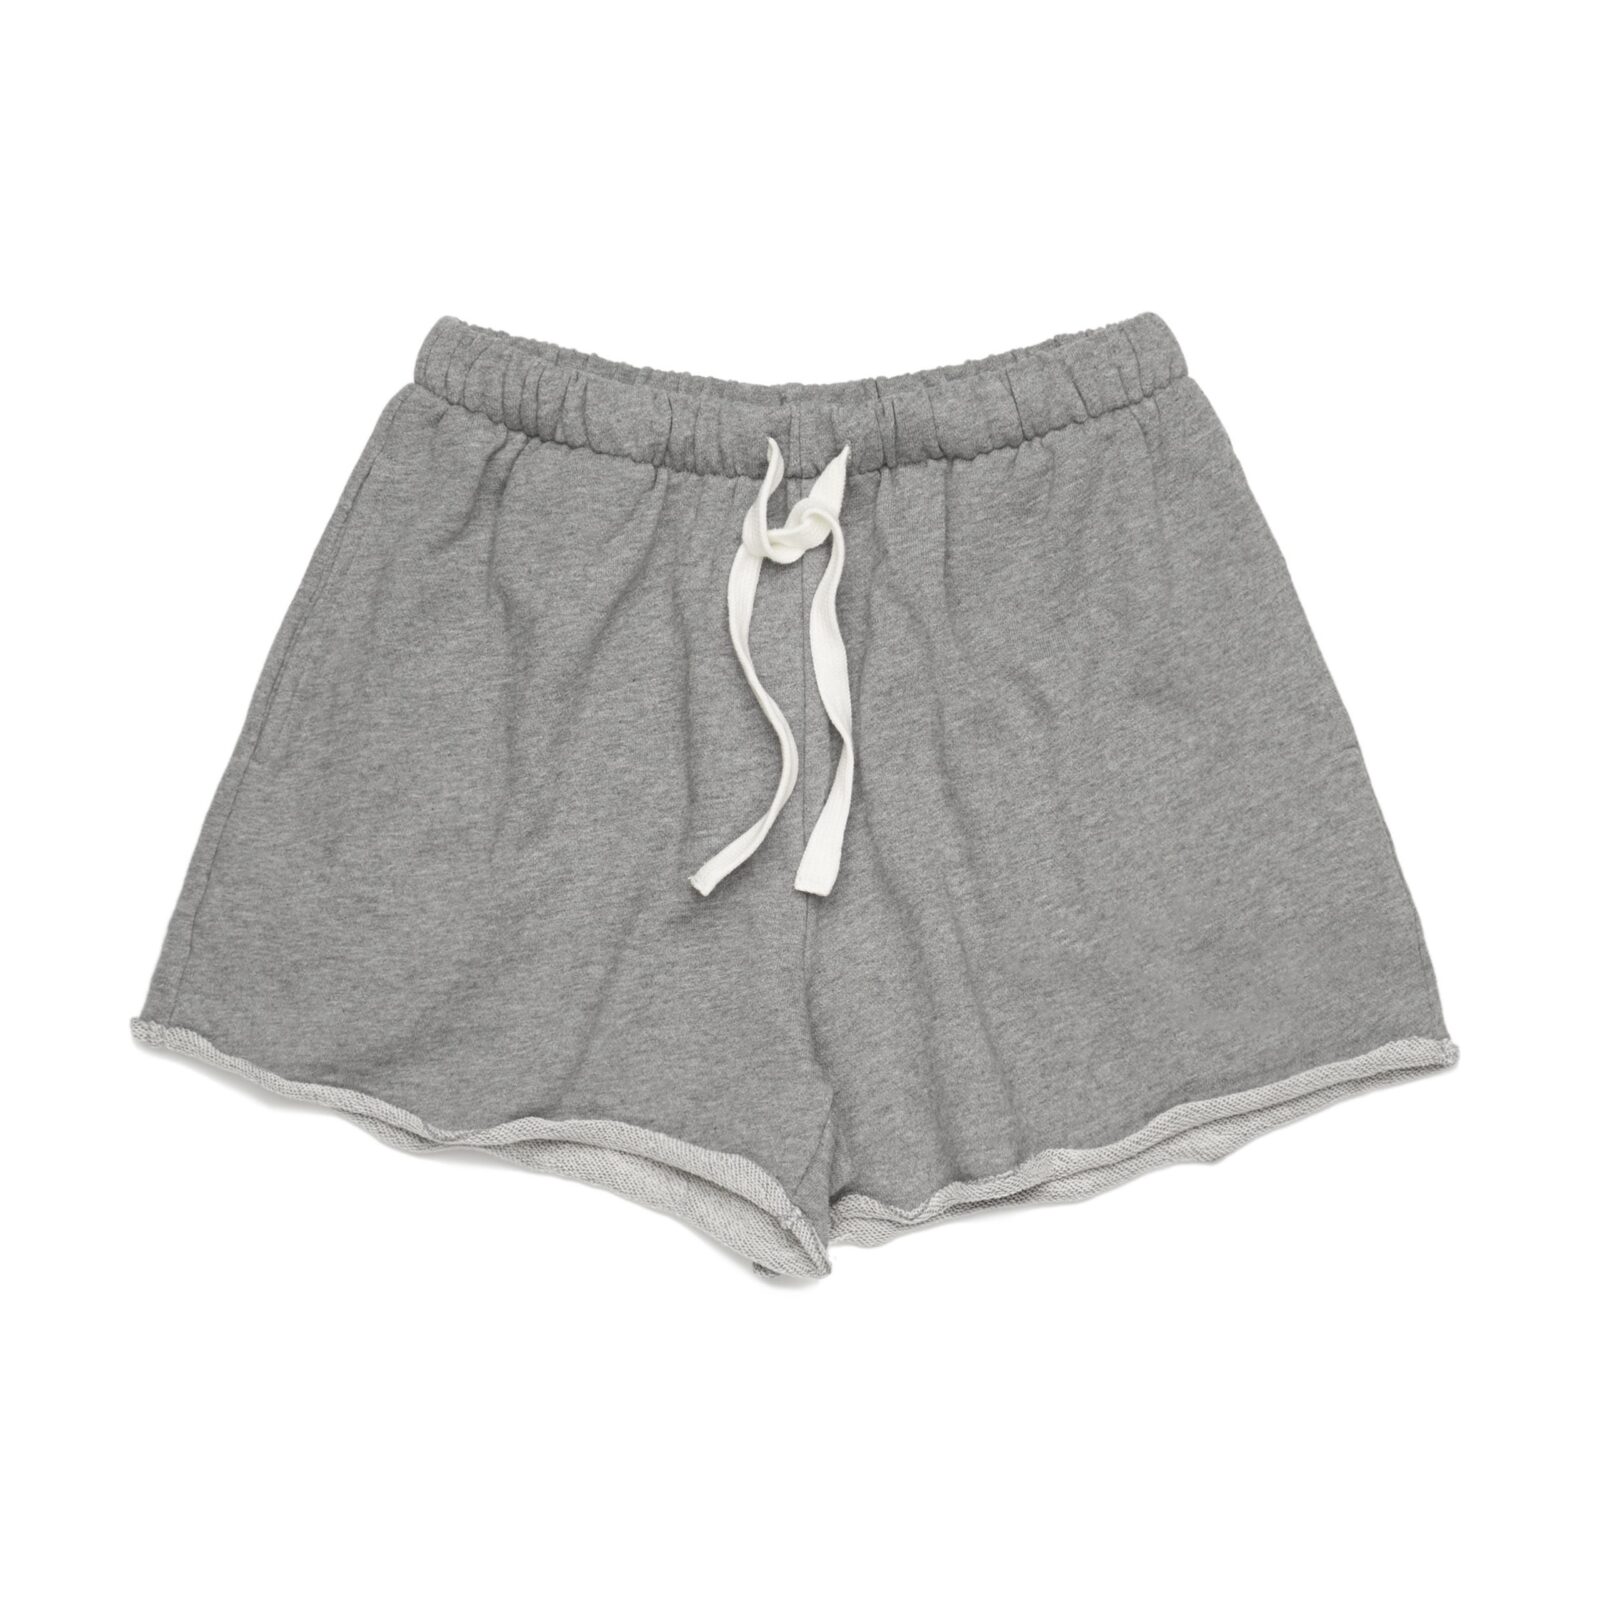 WO'S PERRY TRACK SHORTS - 4039